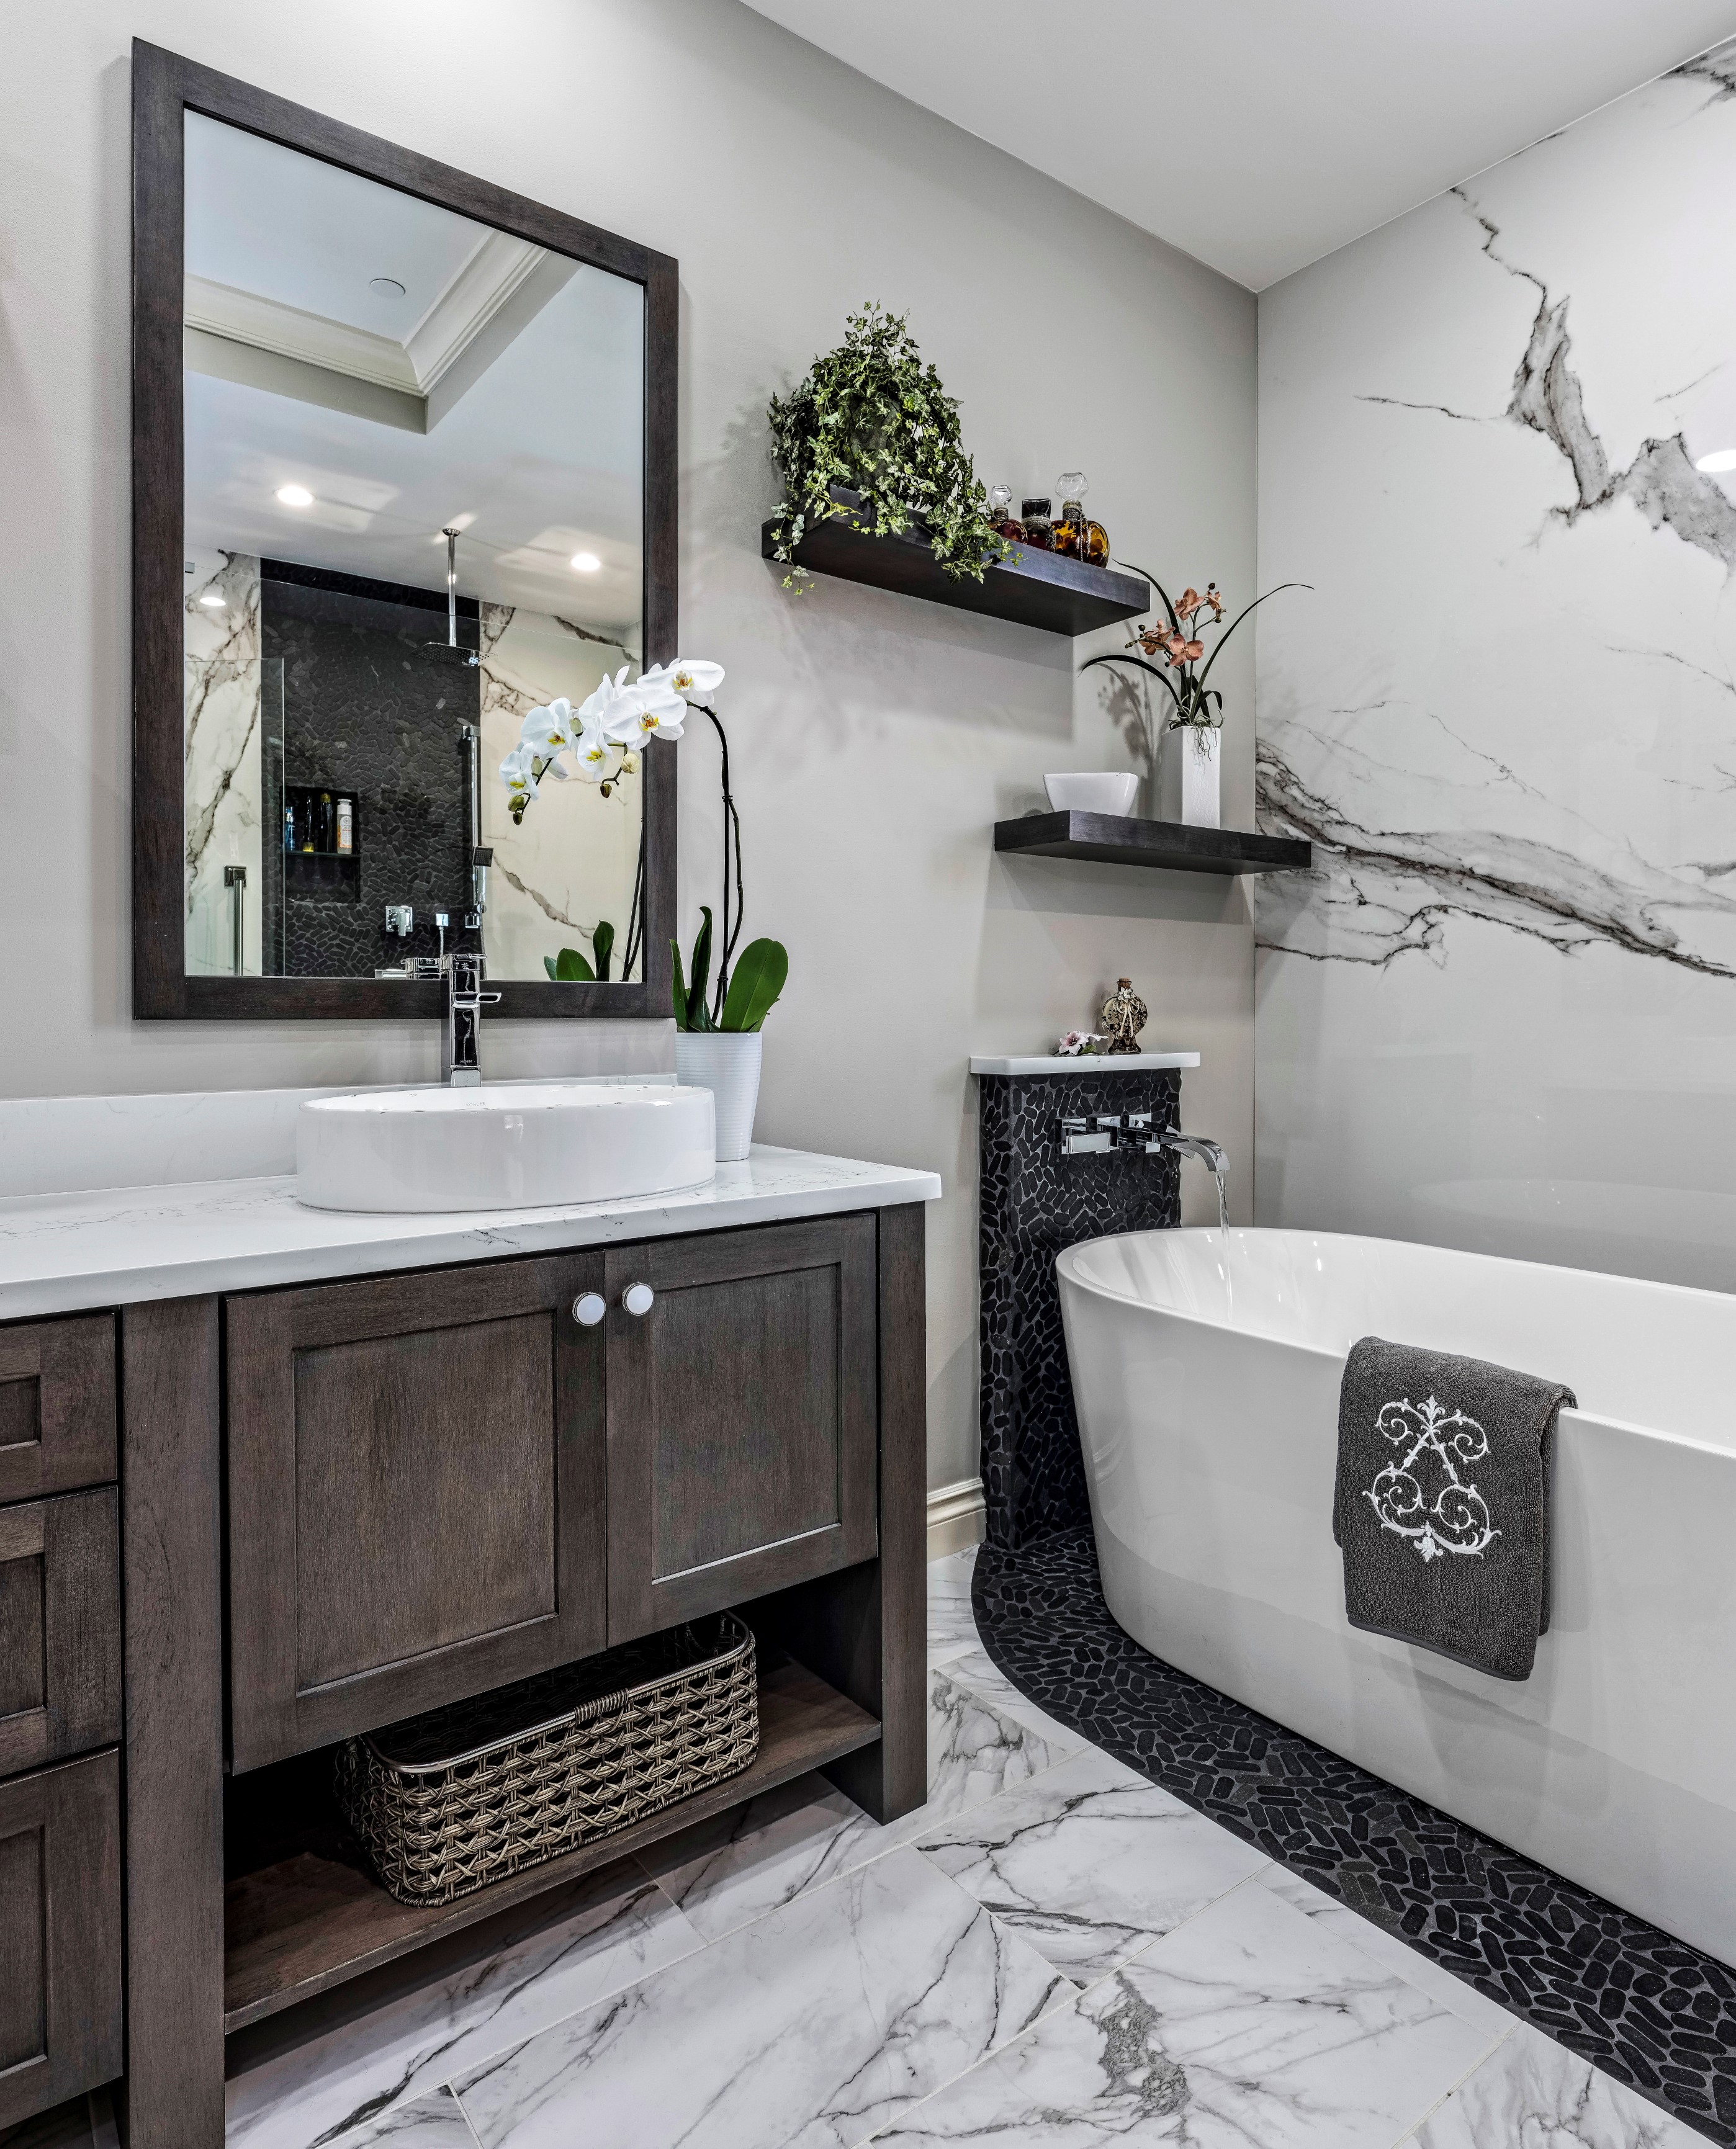 Bathroom Renovation Cost: How Much Does it Cost to Renovate a Bathroom?